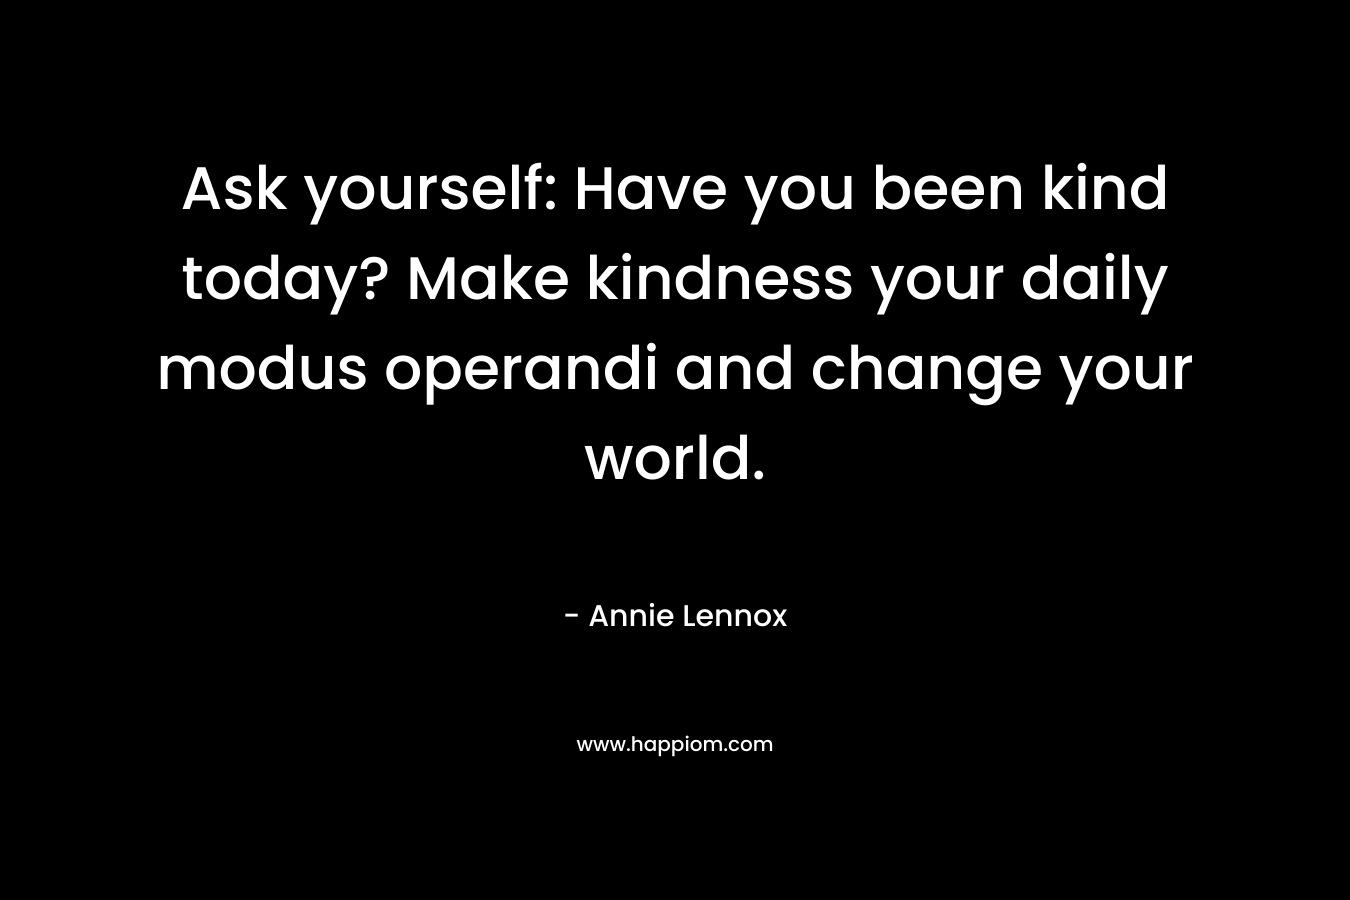 Ask yourself: Have you been kind today? Make kindness your daily modus operandi and change your world.